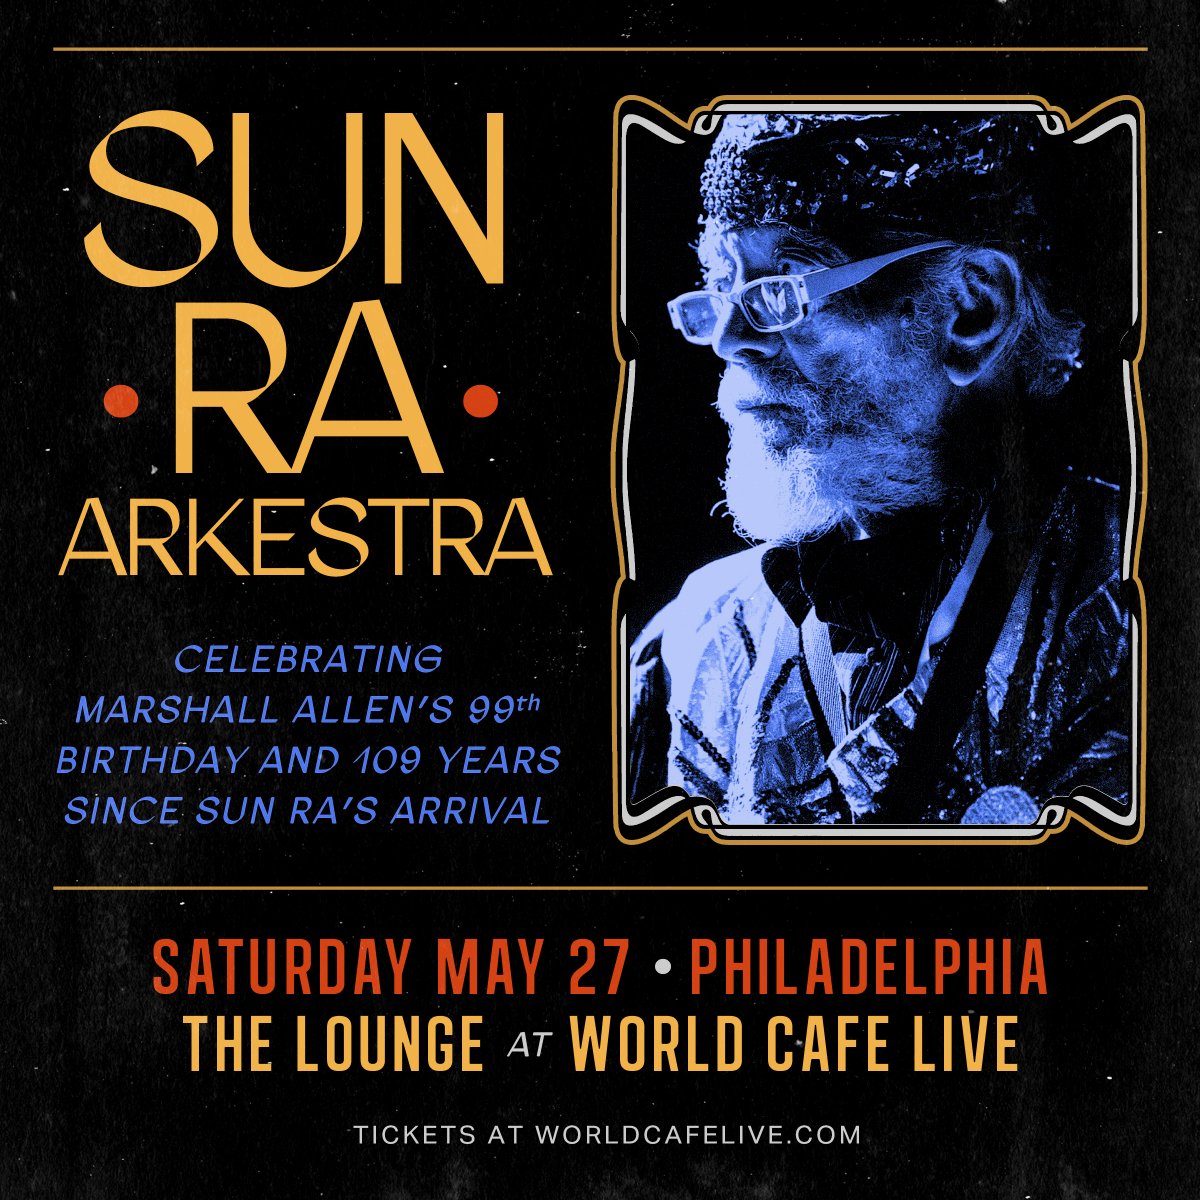 *Tonight* The legendary @SunRaUniverse have SOLD OUT The Lounge to celebrate Marshall Allen's 99th Birthday 💫